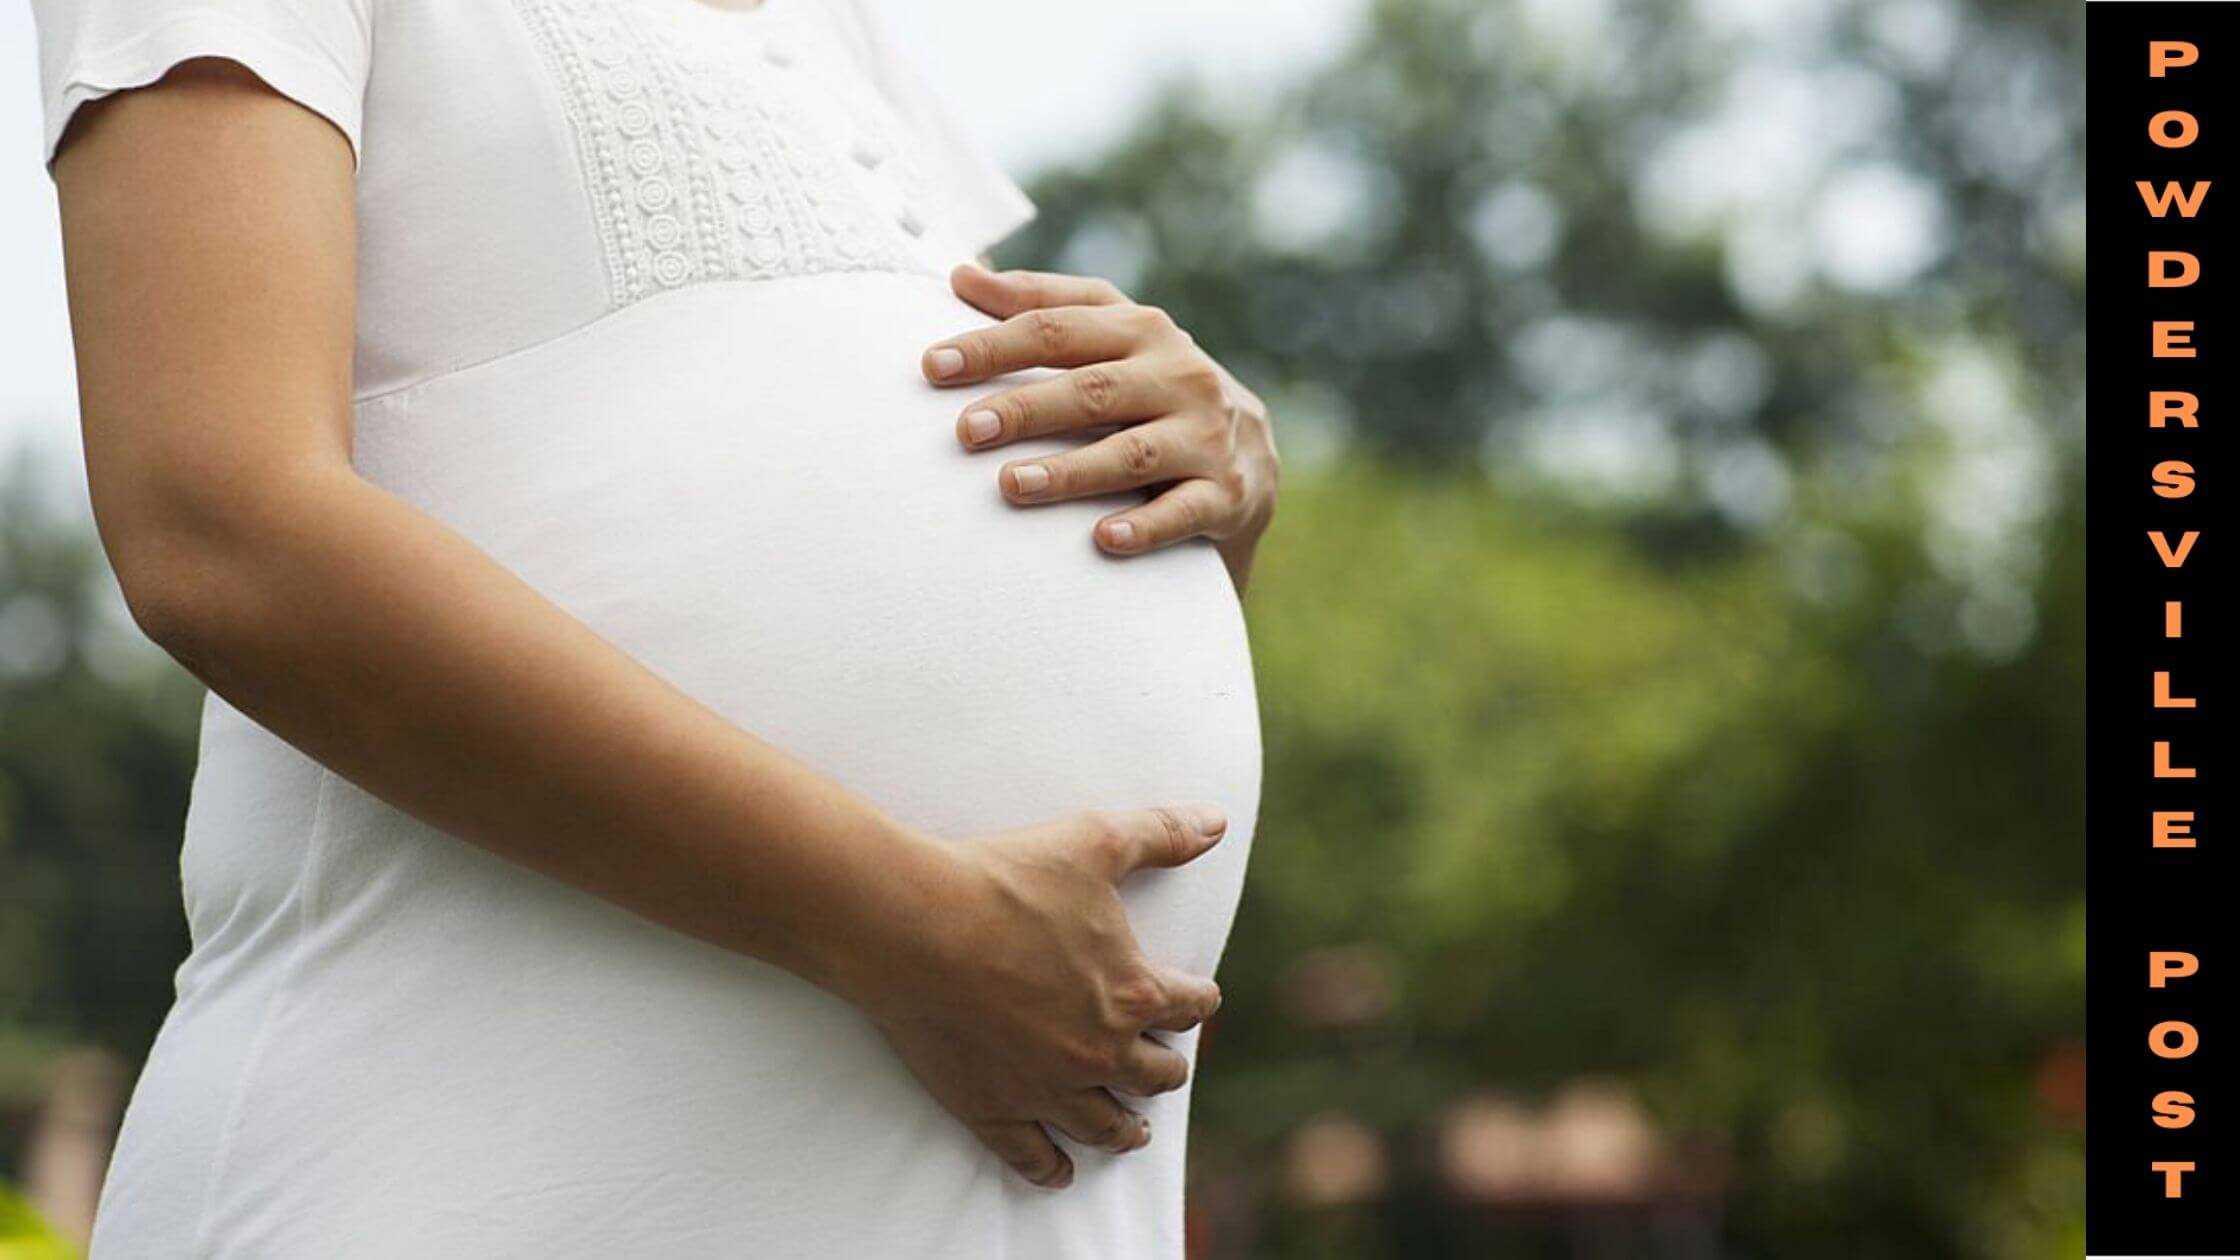 Increase In Maternal Mortality Rates During Pandemic